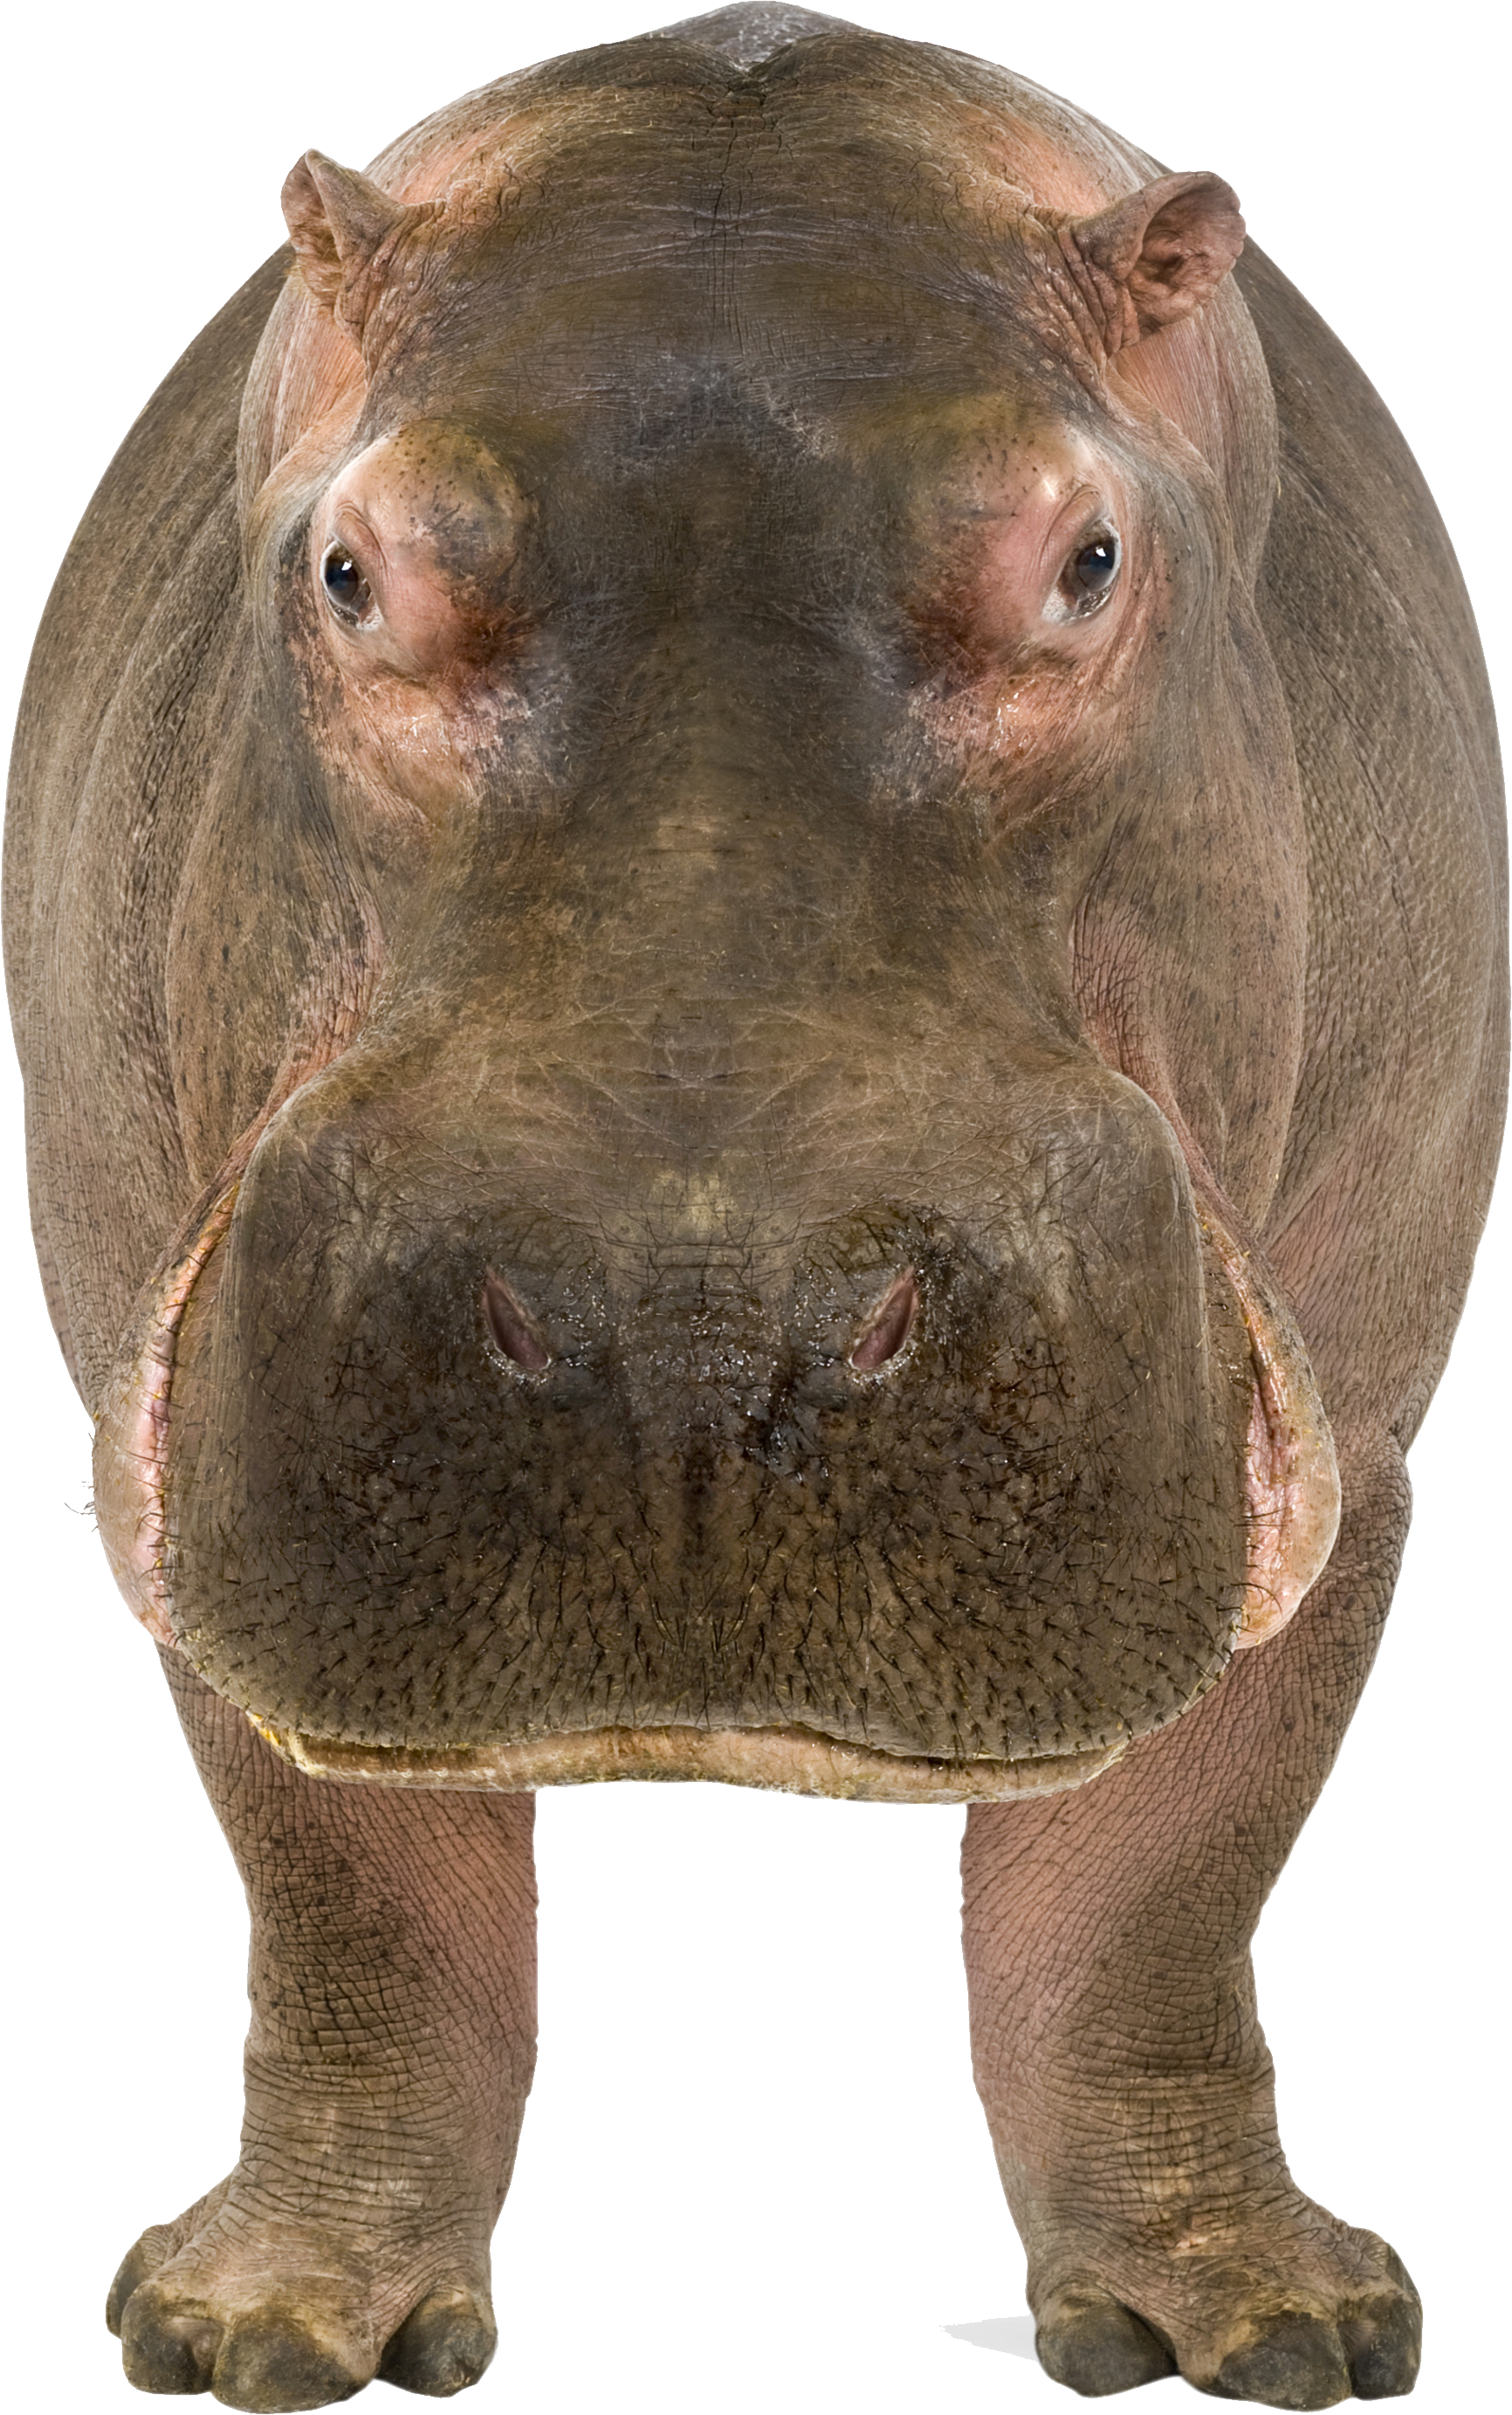 Wild Hippo Download Free Image PNG Image